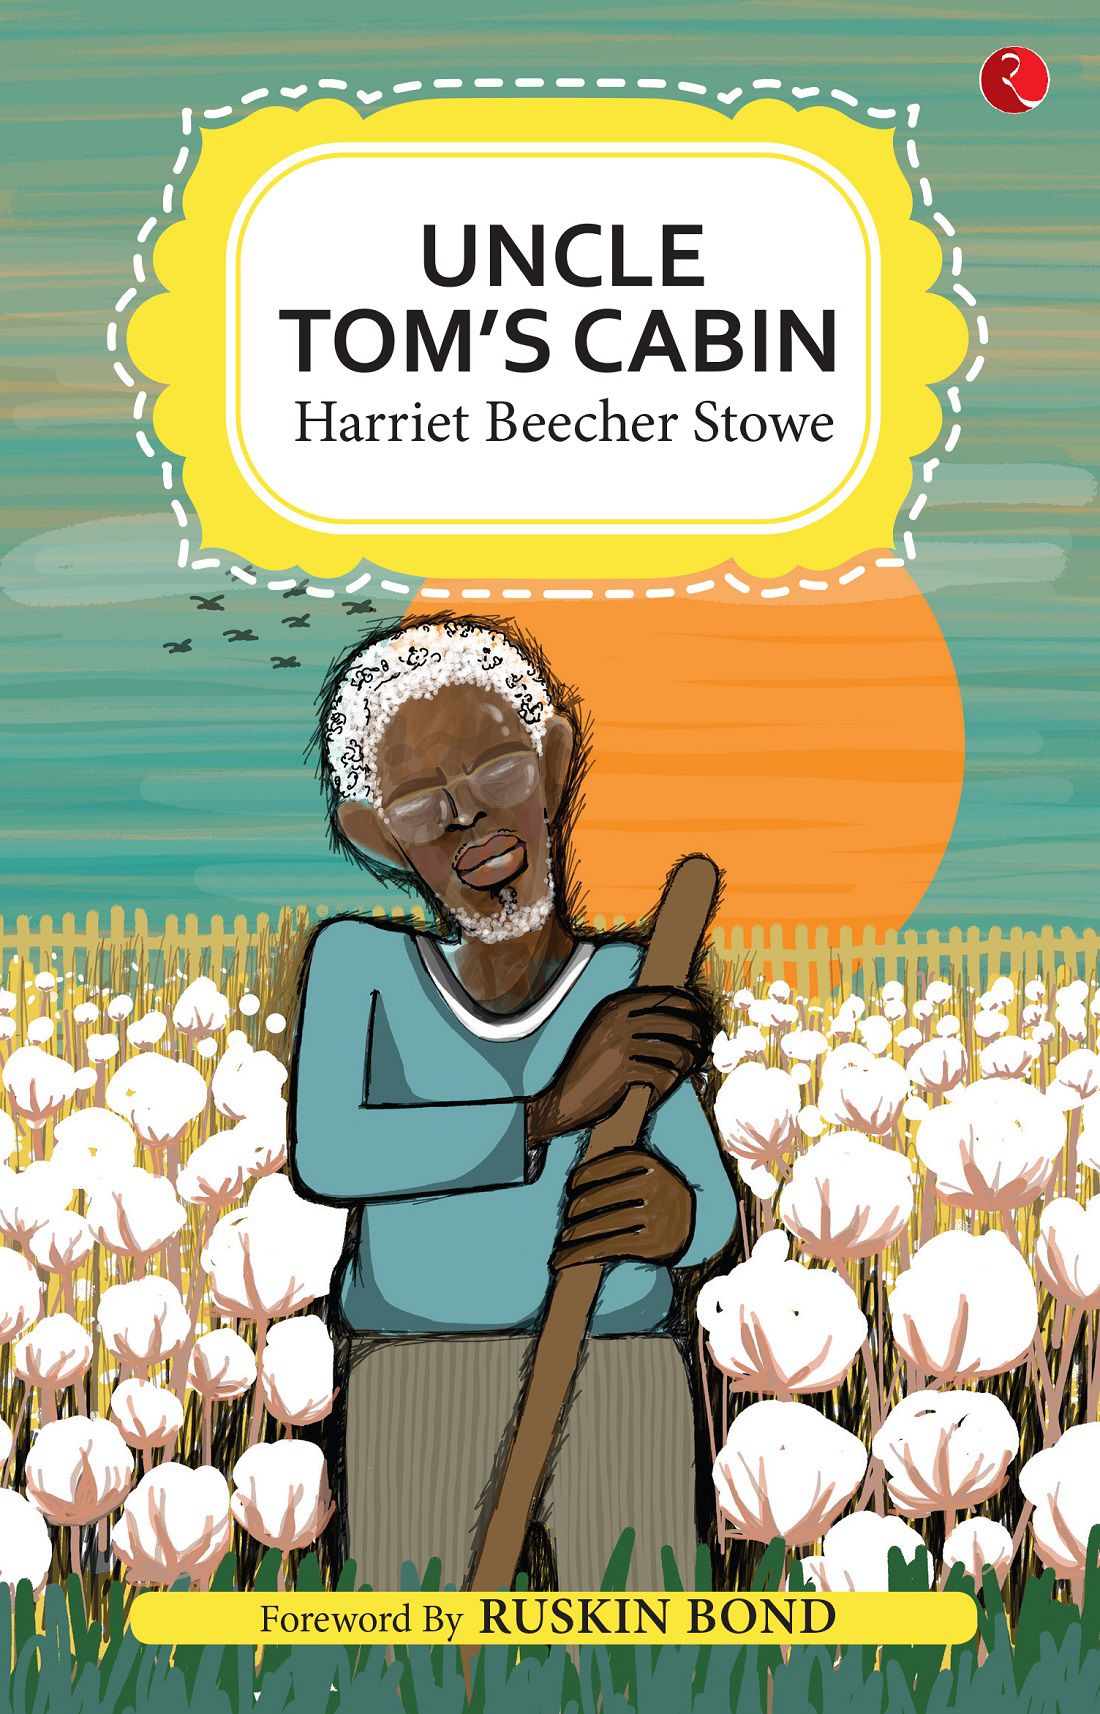     			UNCLE TOM'S CABIN